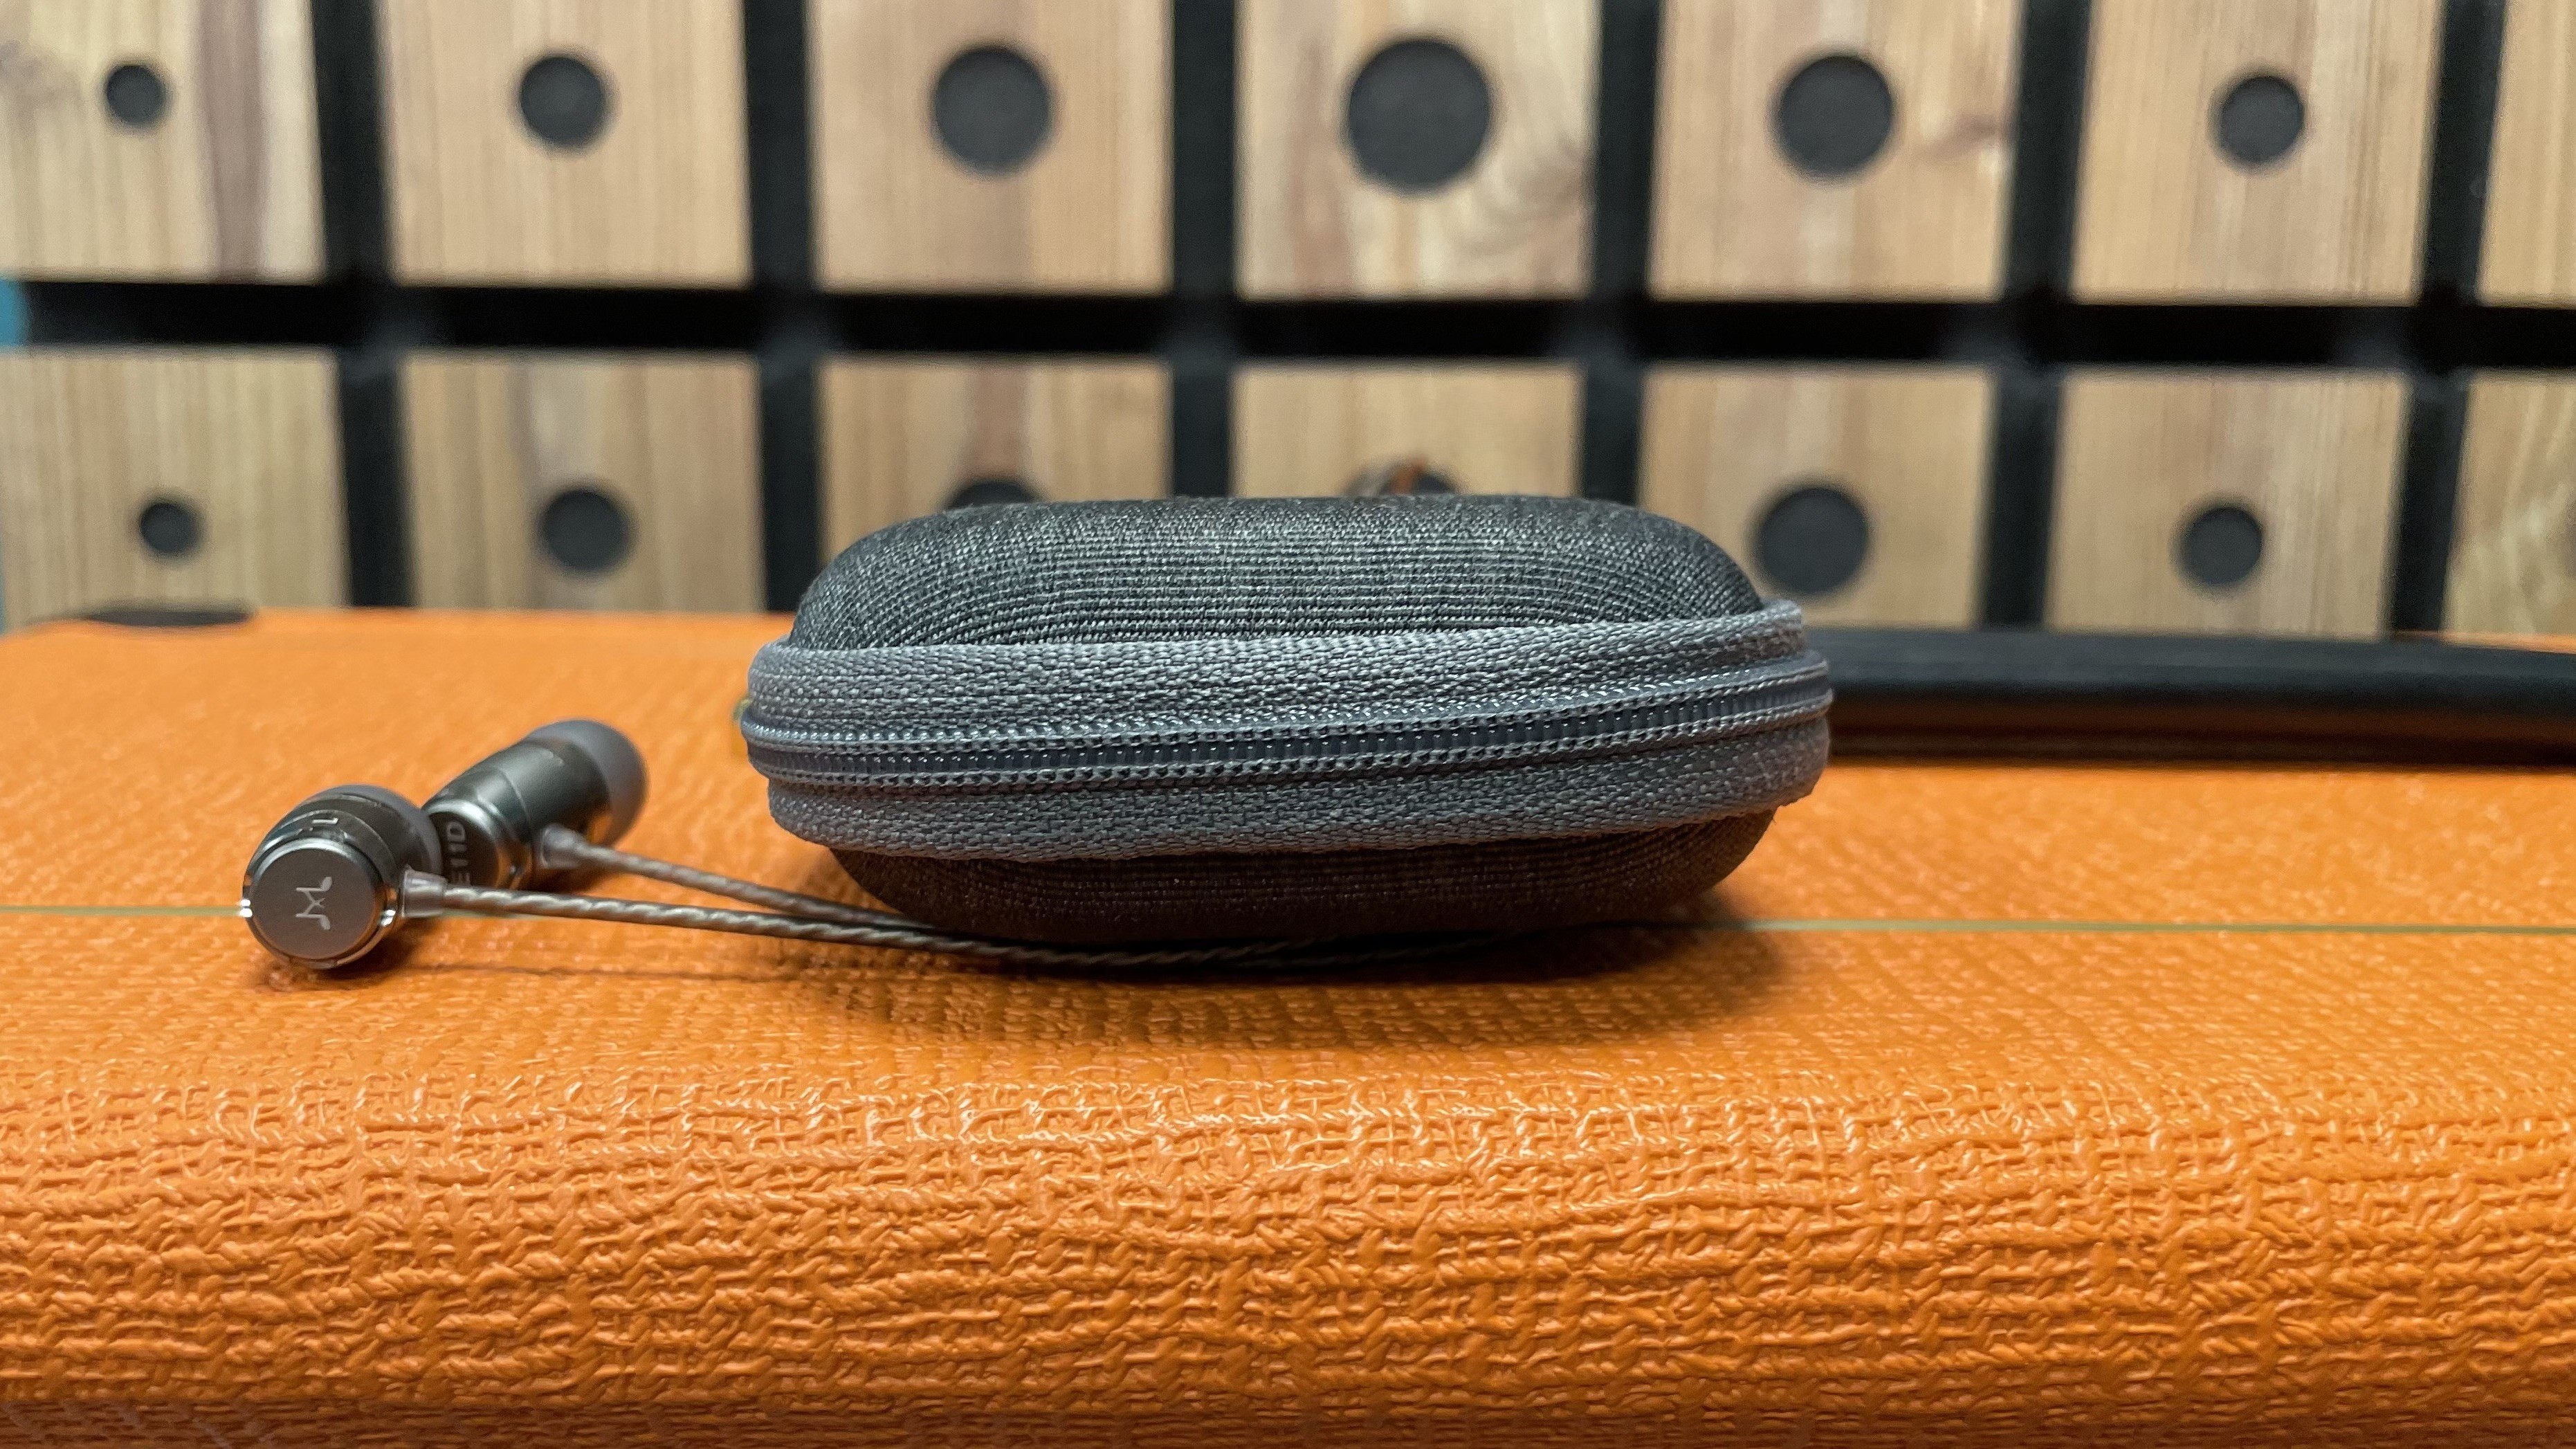 SoundMagic E11D earbuds and gray carry case on top of orange amp